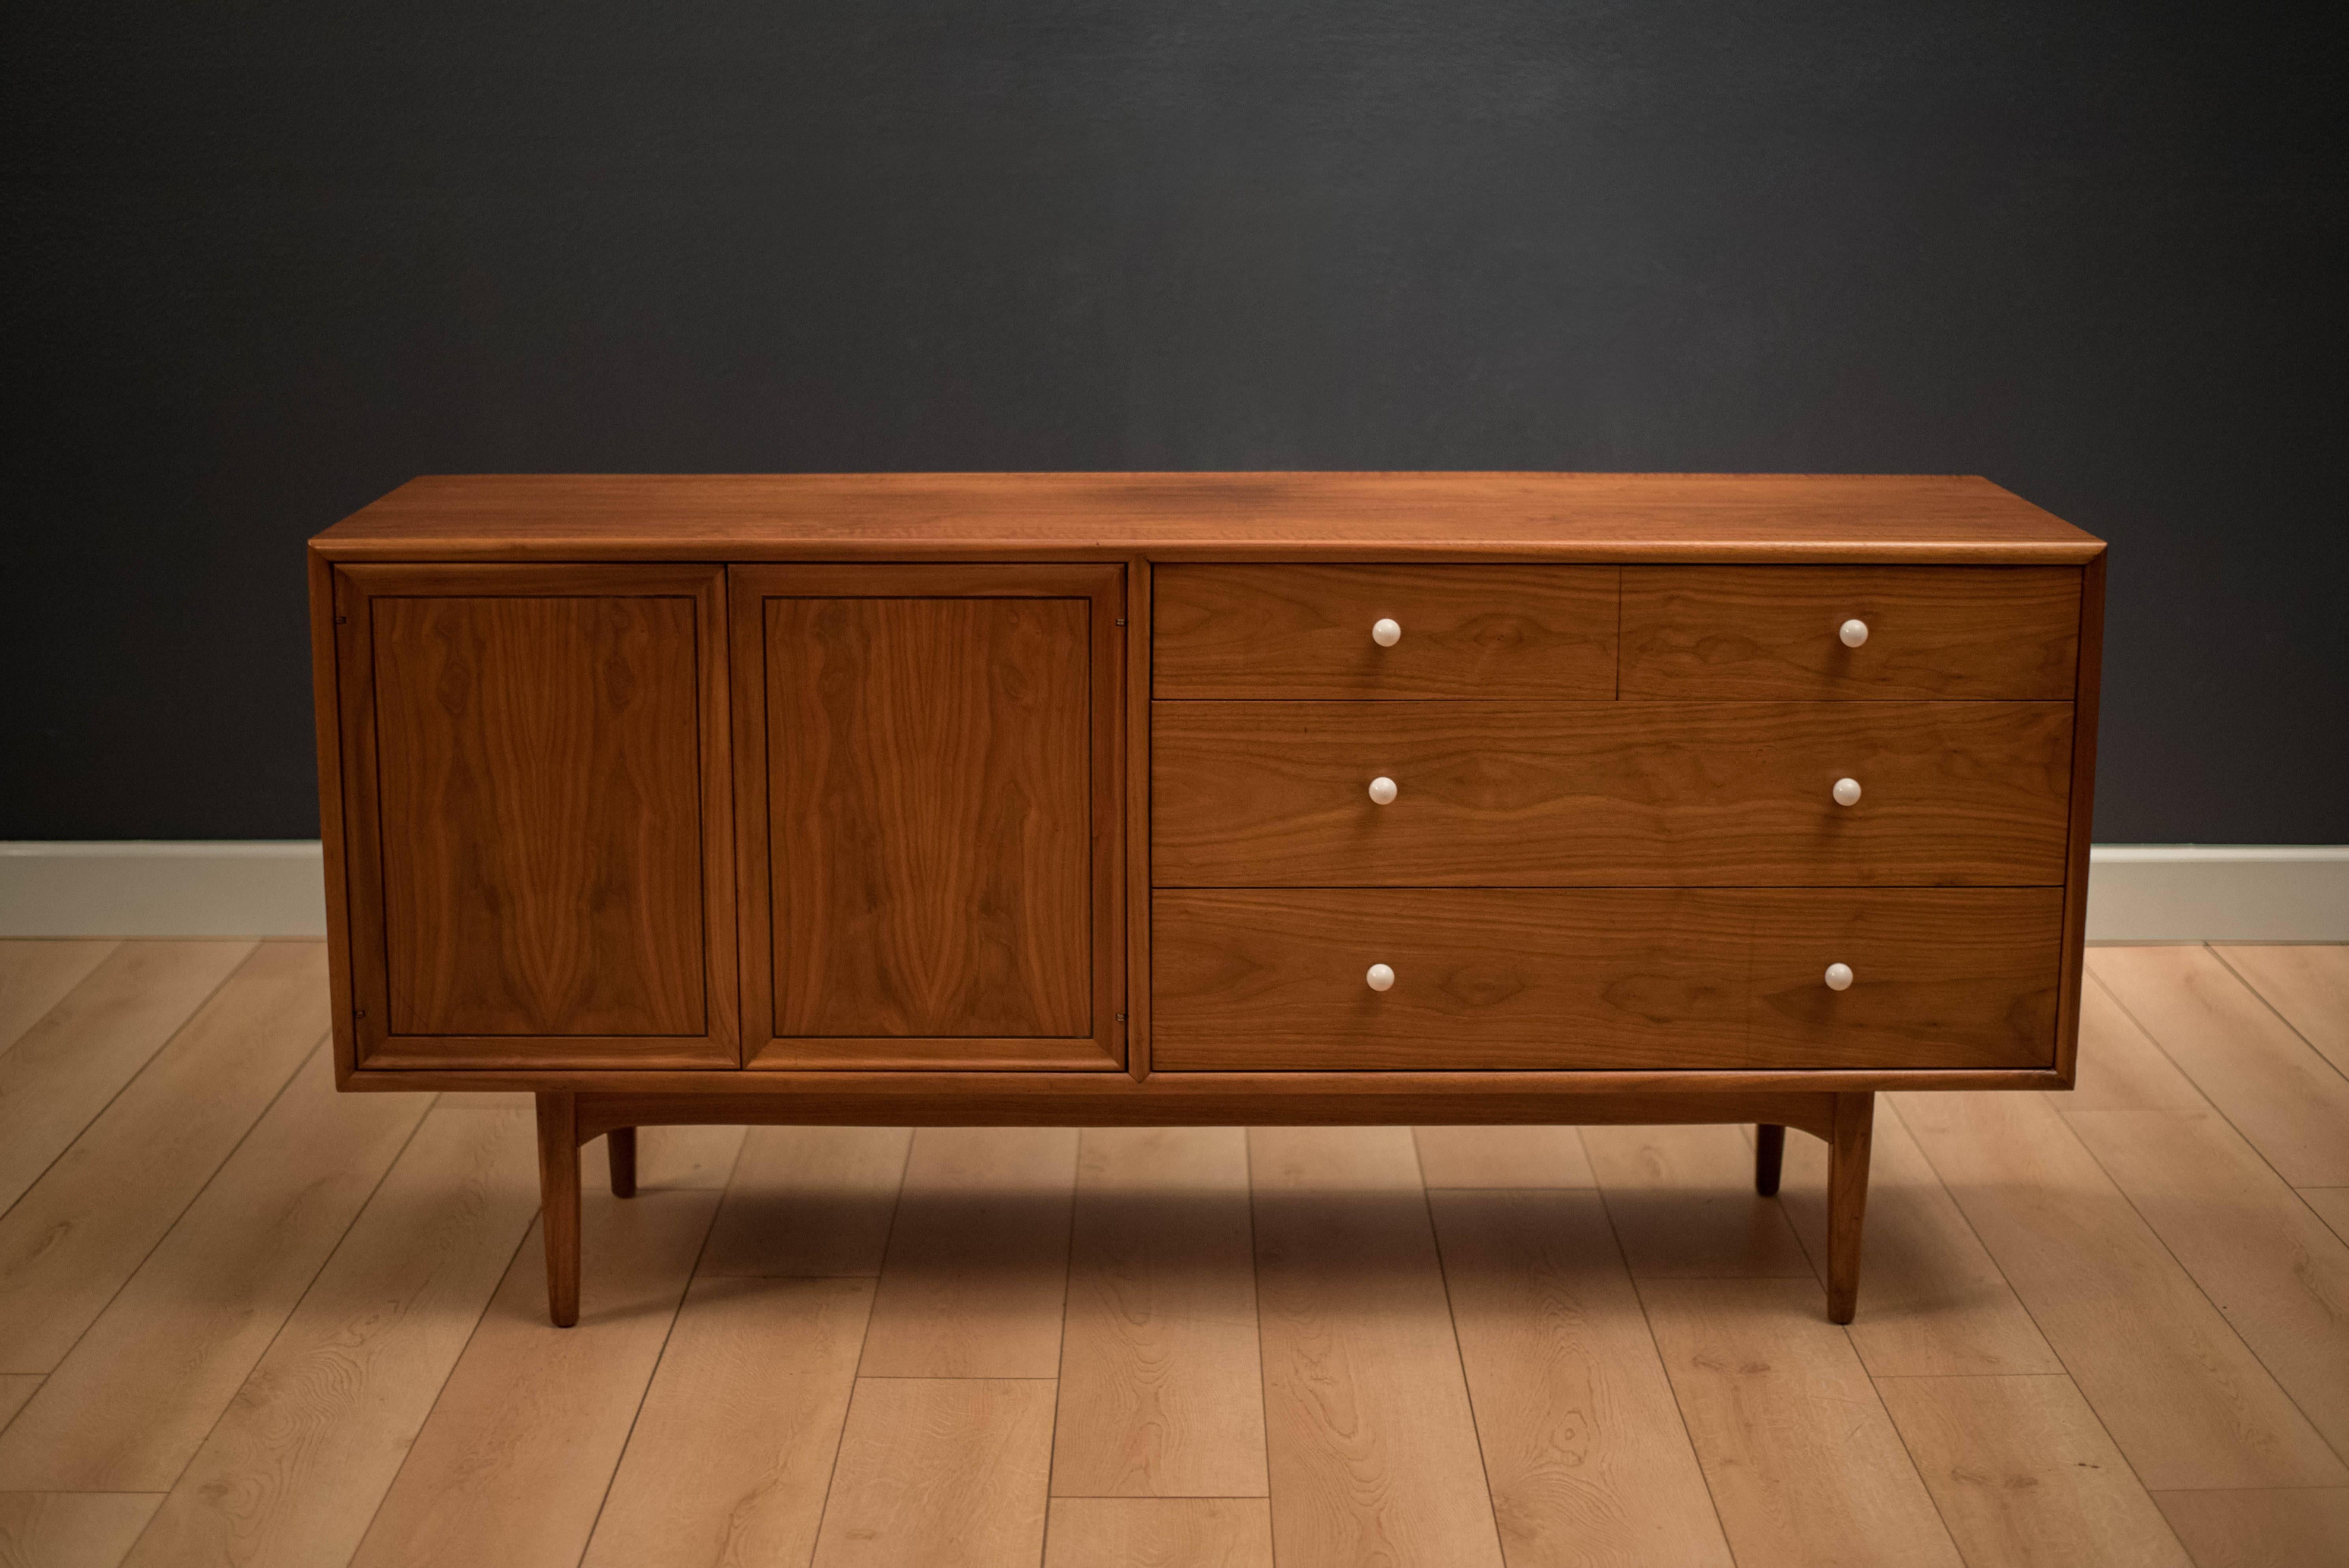 Mid-Century Drexel declaration dresser by Kipp Stewart and Stewart McDougall. This piece is equipped with ten drawers accessorized with signature white porcelain pulls. Case piece is bookmatched with black walnut grains.